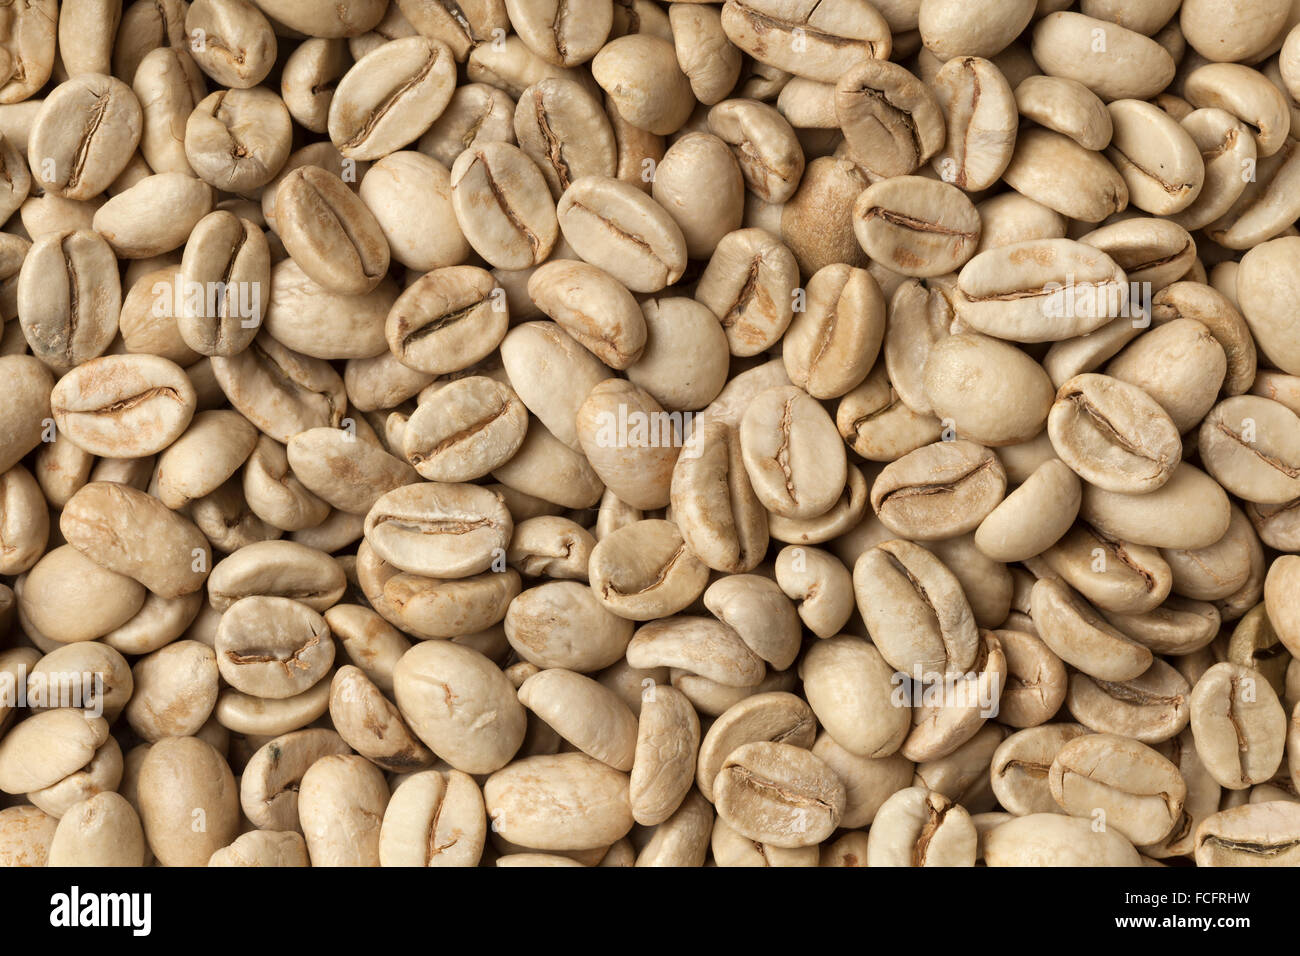 Malabar green unroasted coffee beans from India full frame Stock Photo